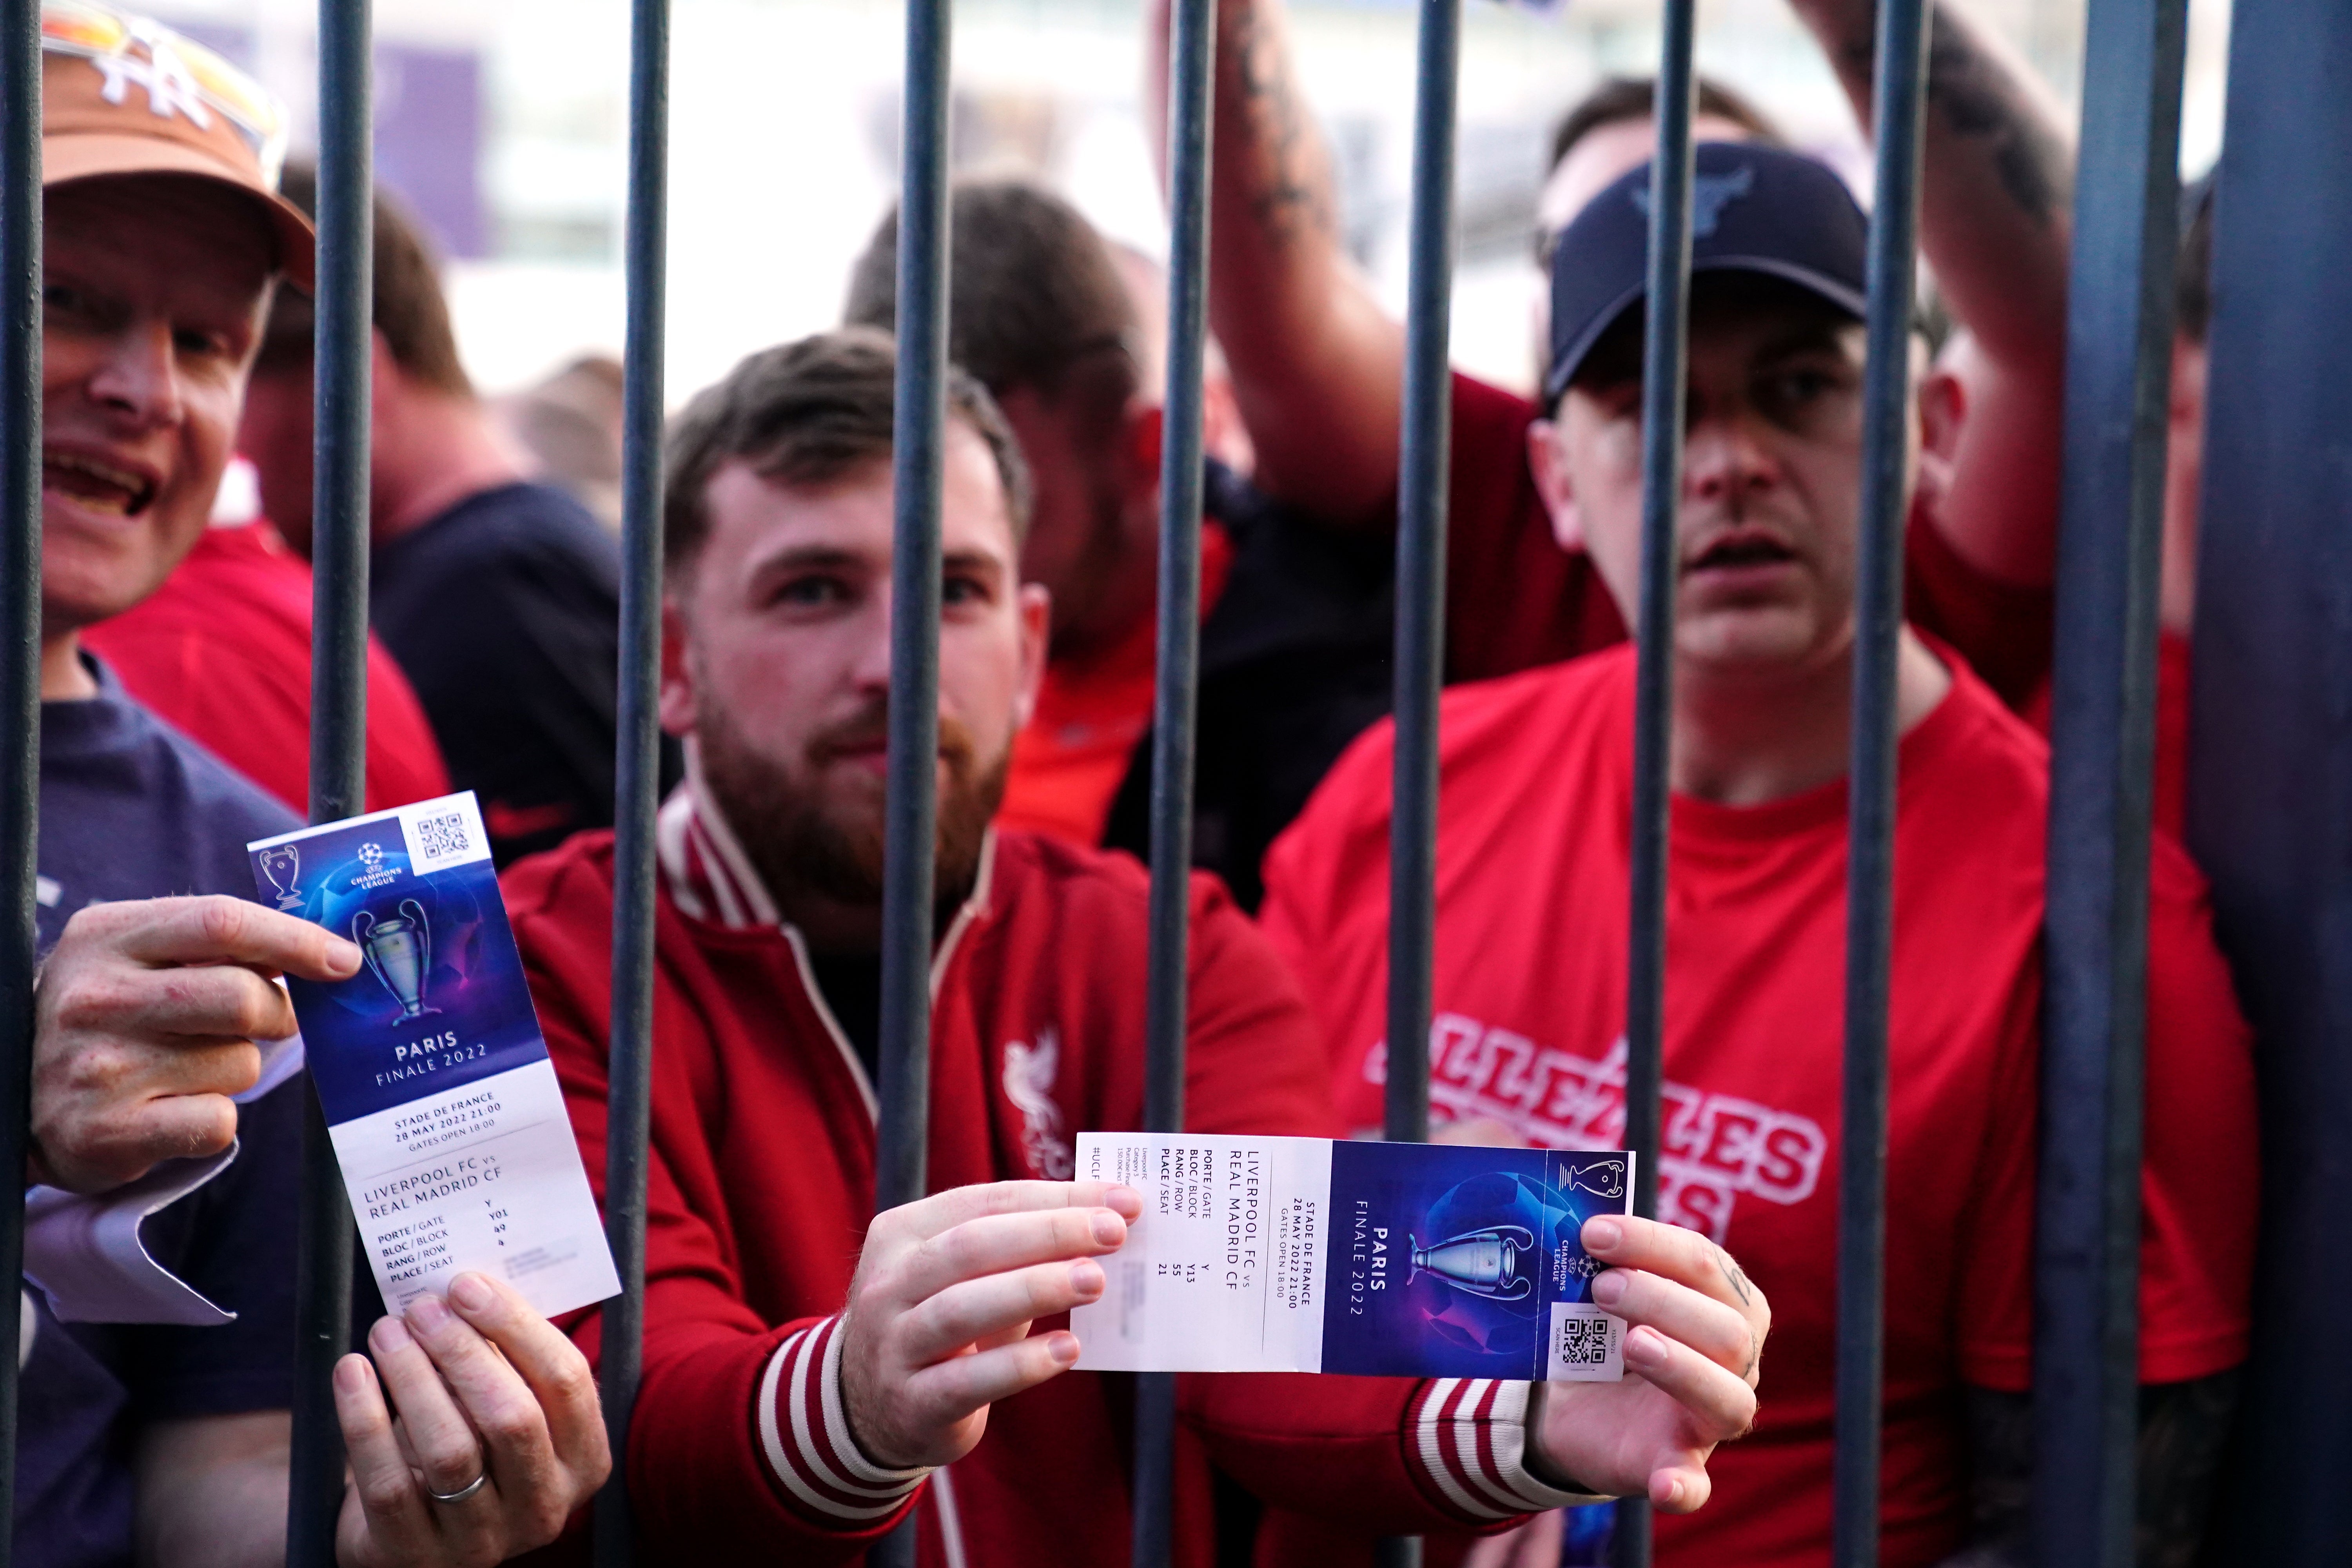 Liverpool fans stuck outside the stadium show their match tickets (Adam Davy/PA)